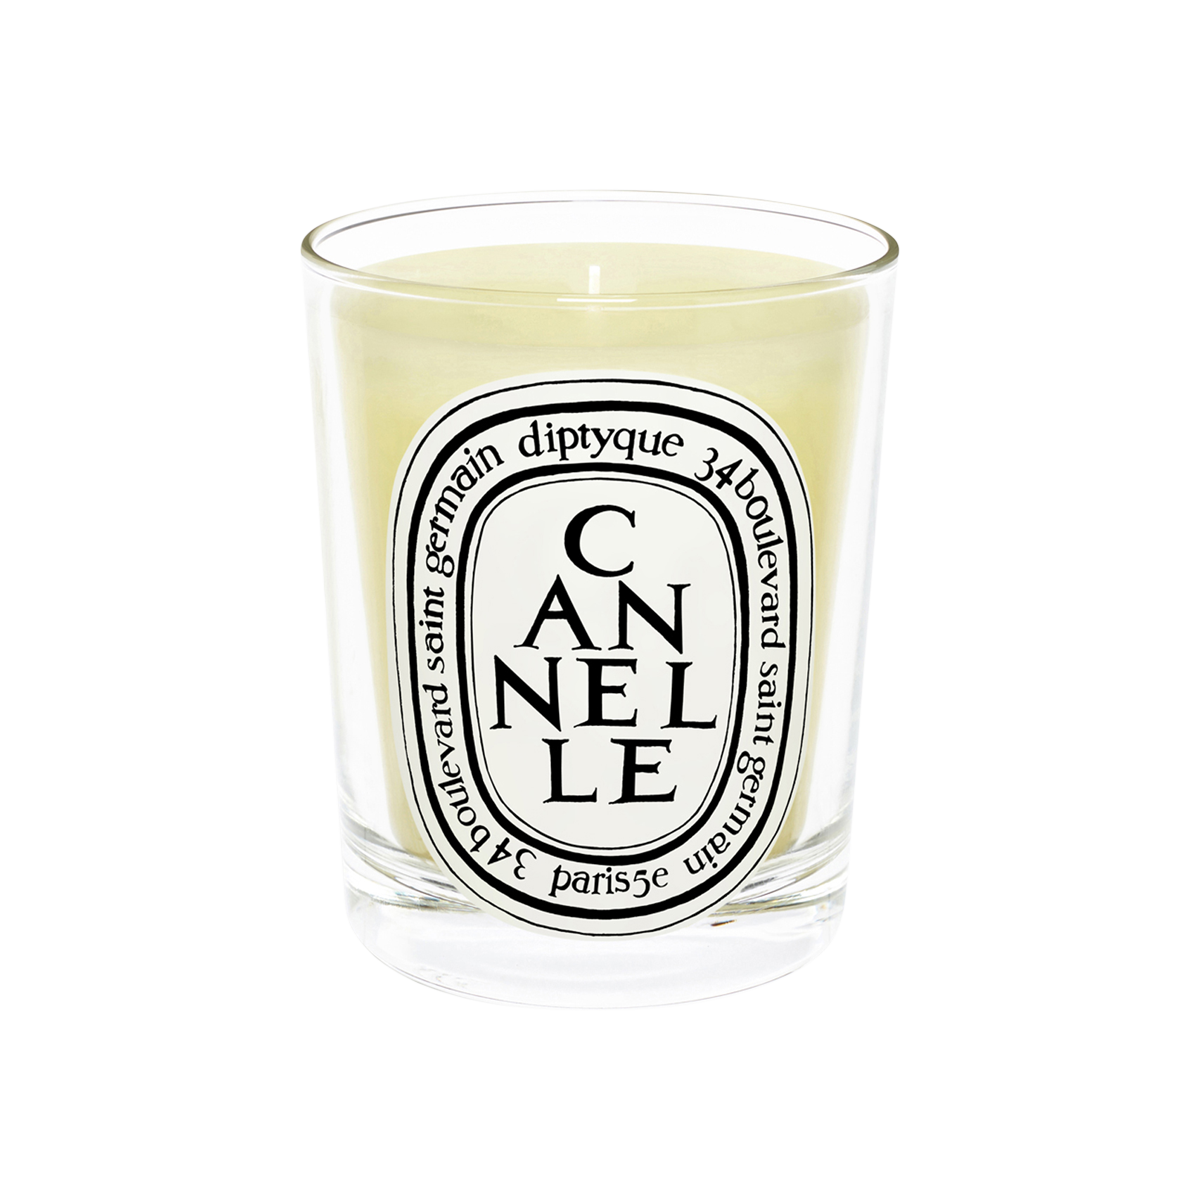 Diptyque - Canelle Scented Candle